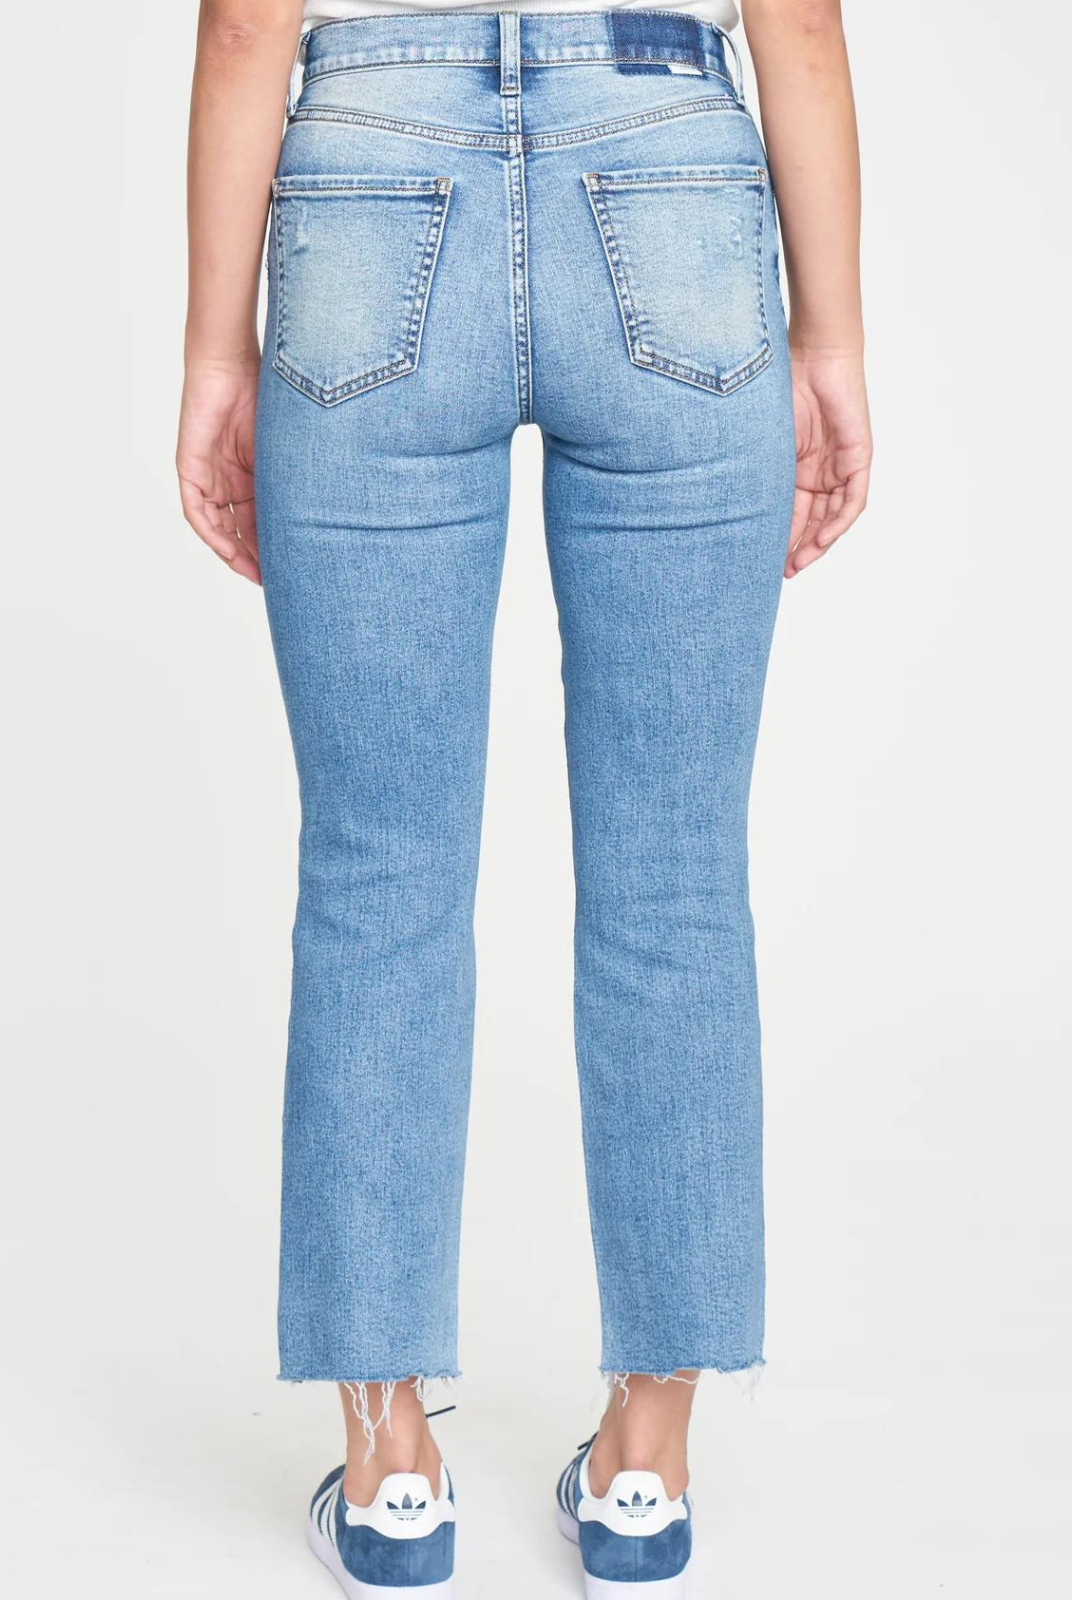 Daze- Shy Girl Crop Flare-PDA Need a Hug? This cropped flare is made using our "Hug" denim. It is a slightly heavier fabric with a stretch that hugs your body, while smoothly cinching you in. In a medium wash with vintage fading, this is a core jean for your closet